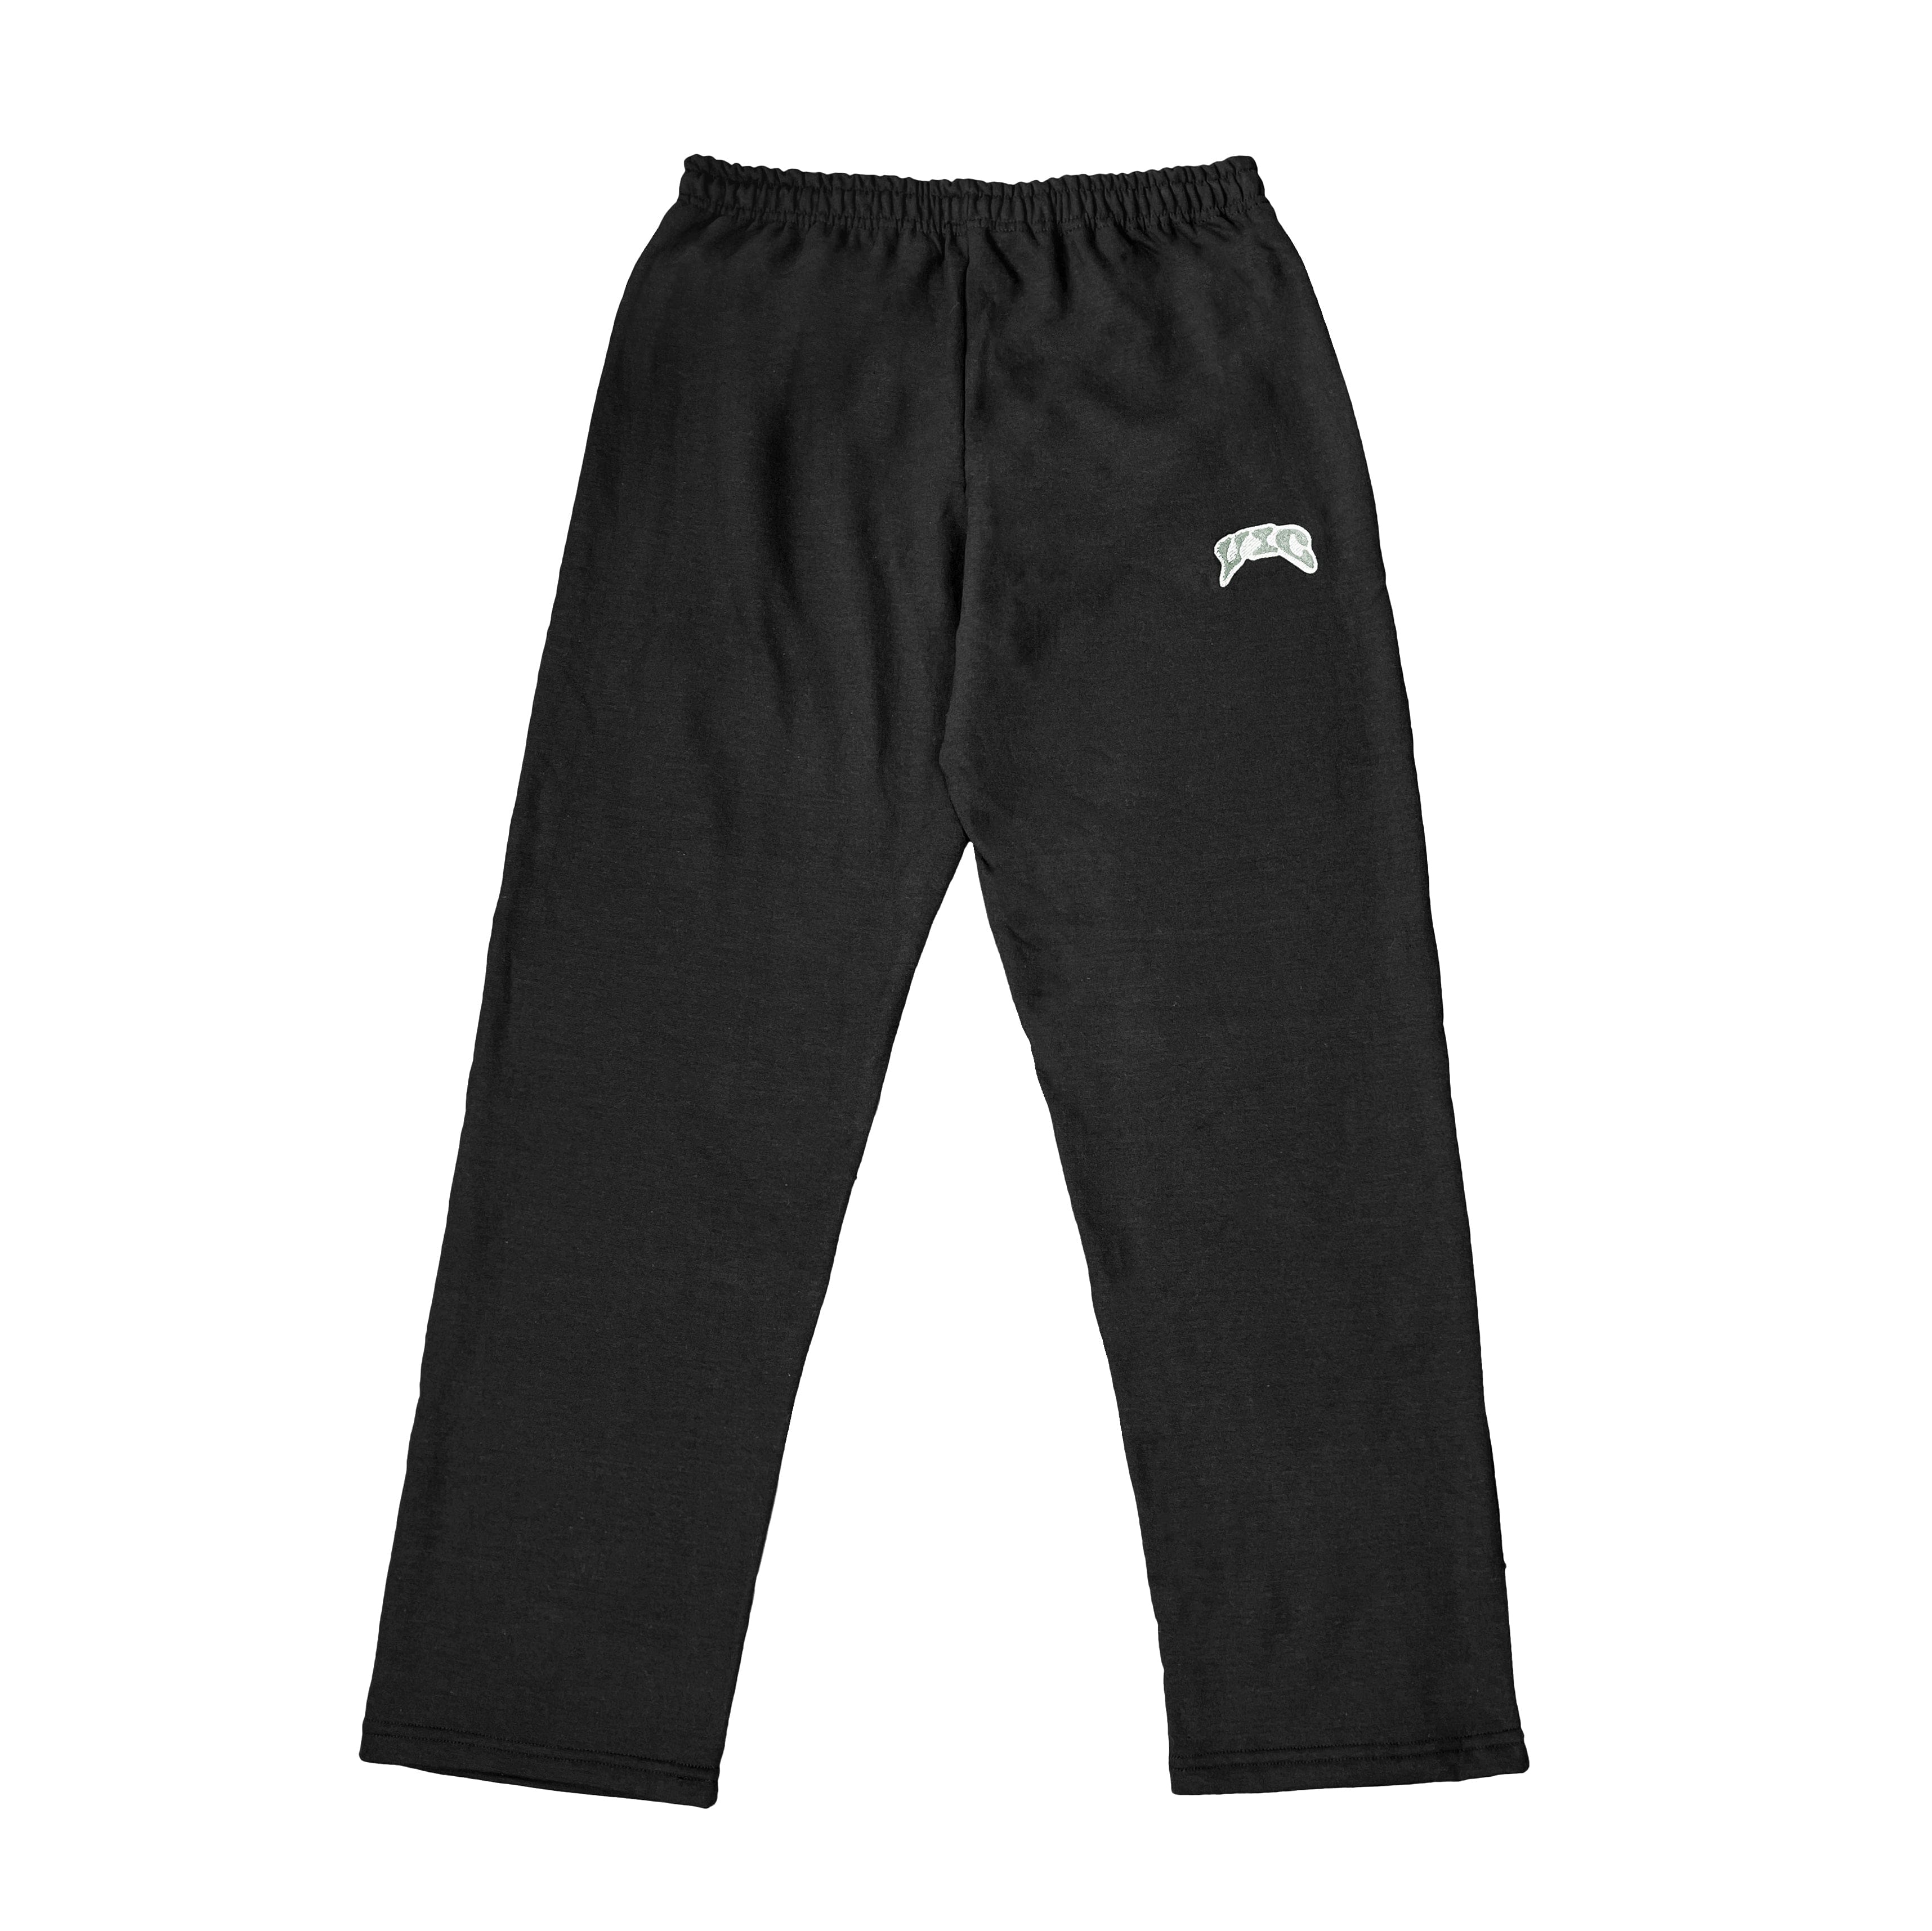 90s vintage style trackpants. The go to athletic sweatpants for school sports and gym class. Made with medium-weight fleece. straight leg open bottom sweat pants